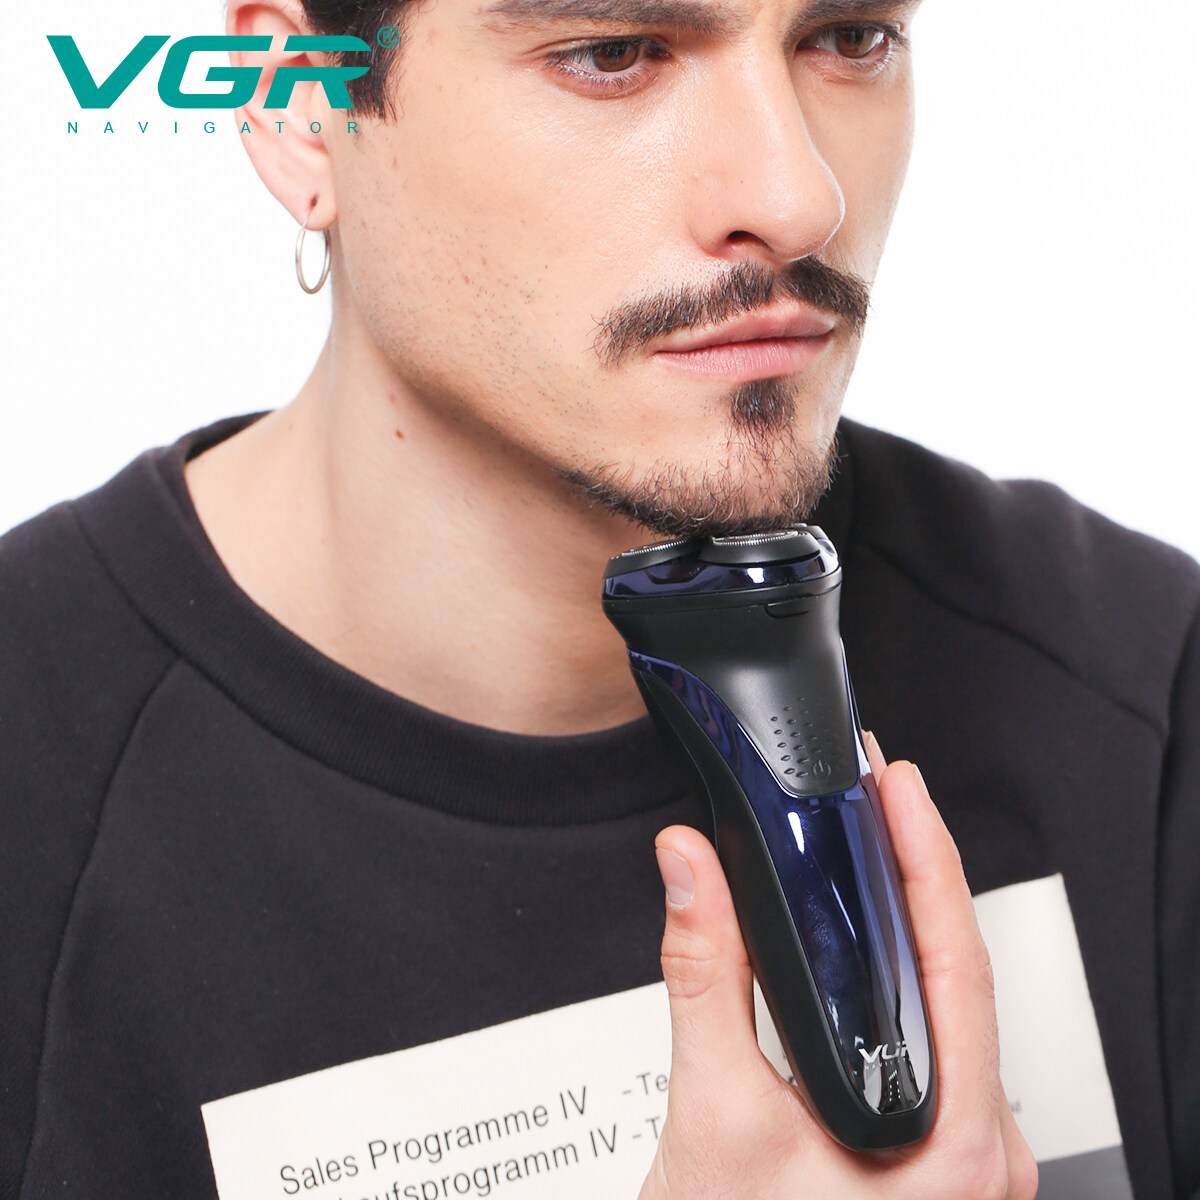 household electric shaver manufacturer, household electric shaver supplier, household electric shaver factory, men IPX7 electric shaver factory, wholesale washable IPX7 electric shaver